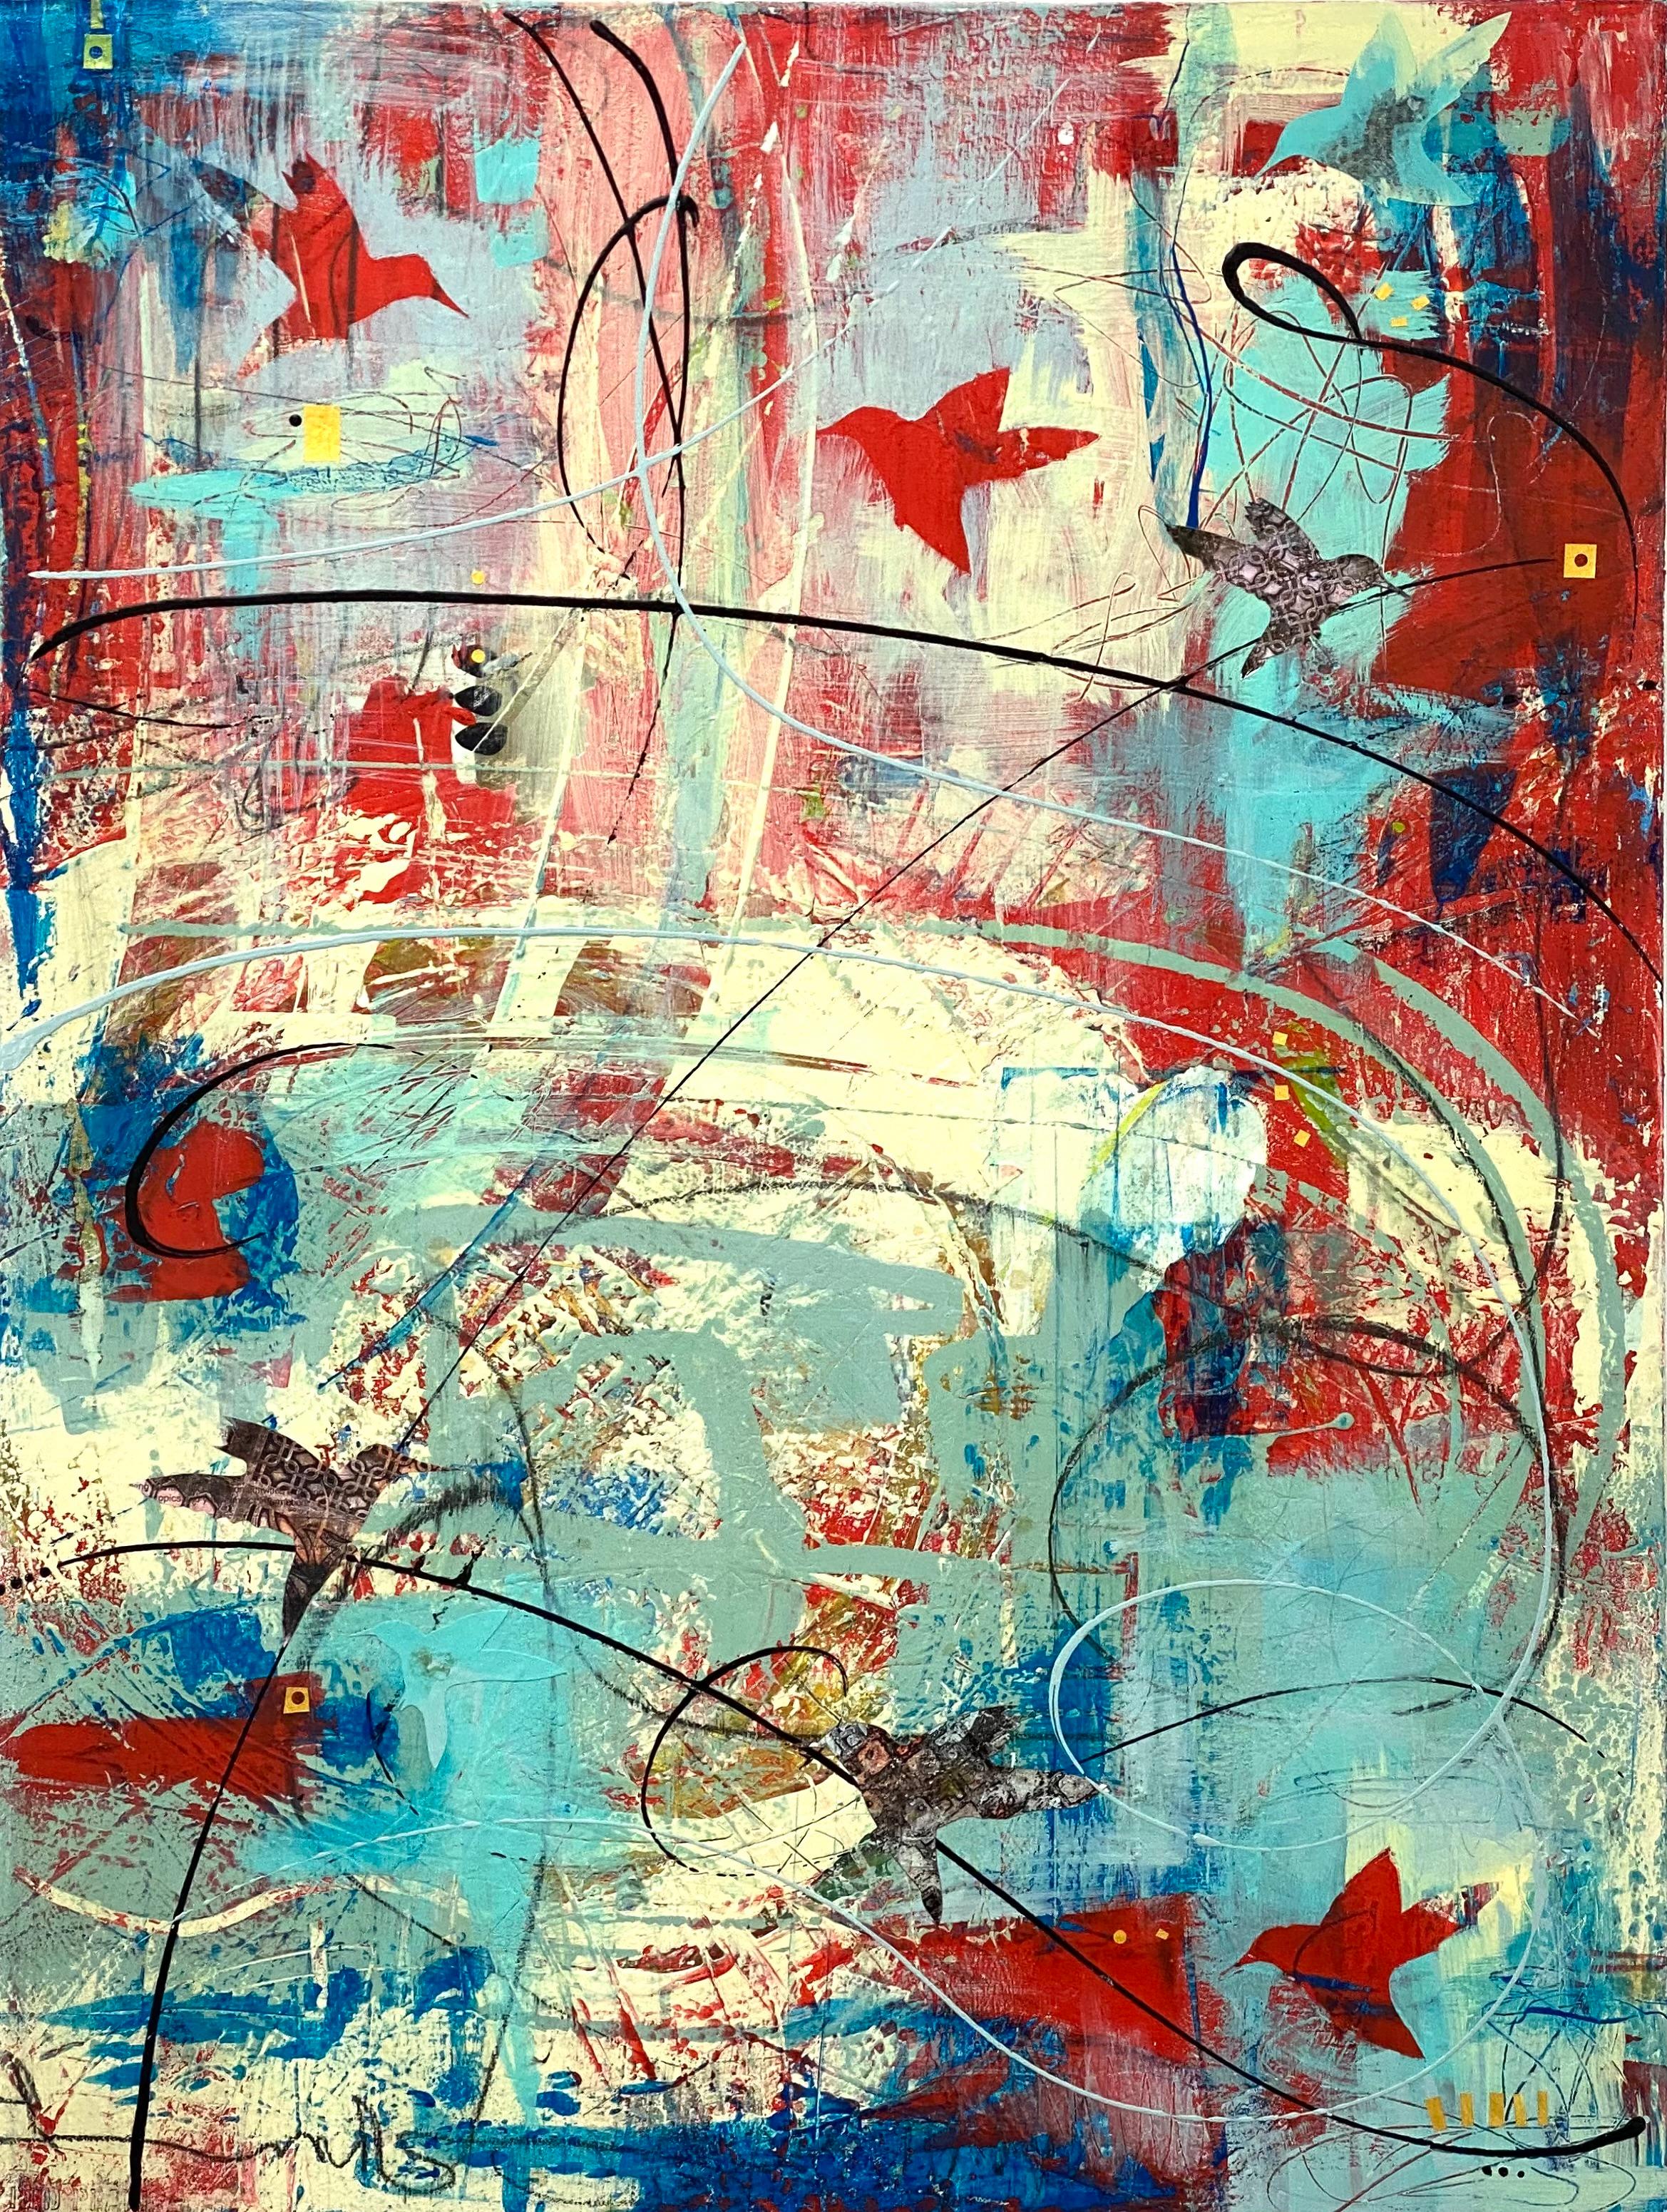 Take Flight, Abstract Painting - Mixed Media Art by Linda Shaffer